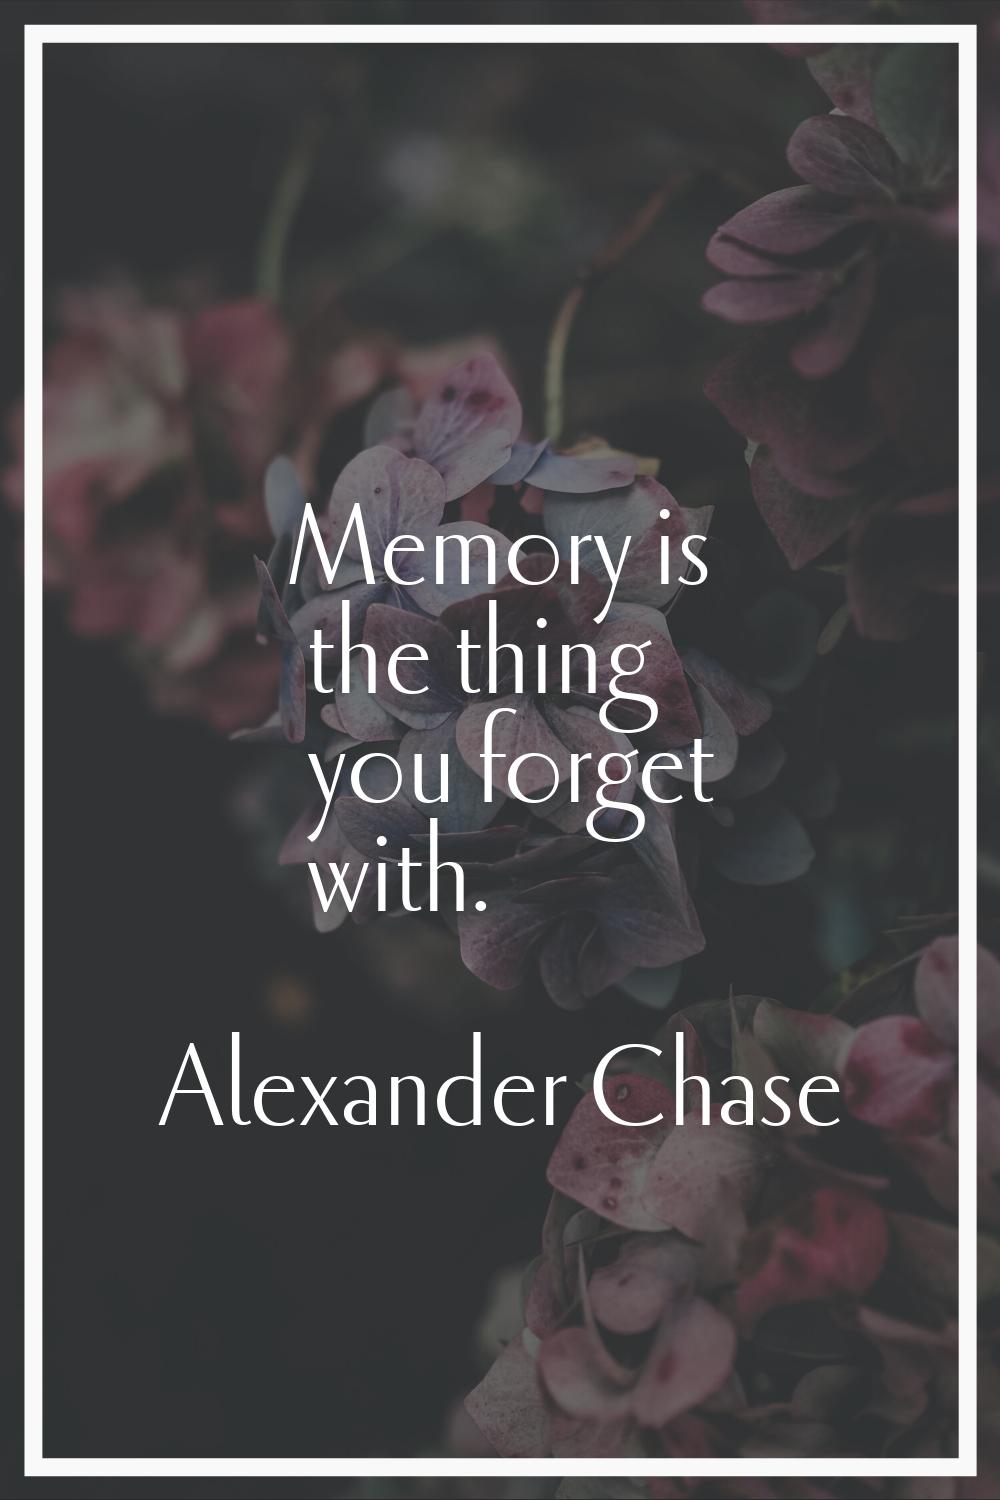 Memory is the thing you forget with.